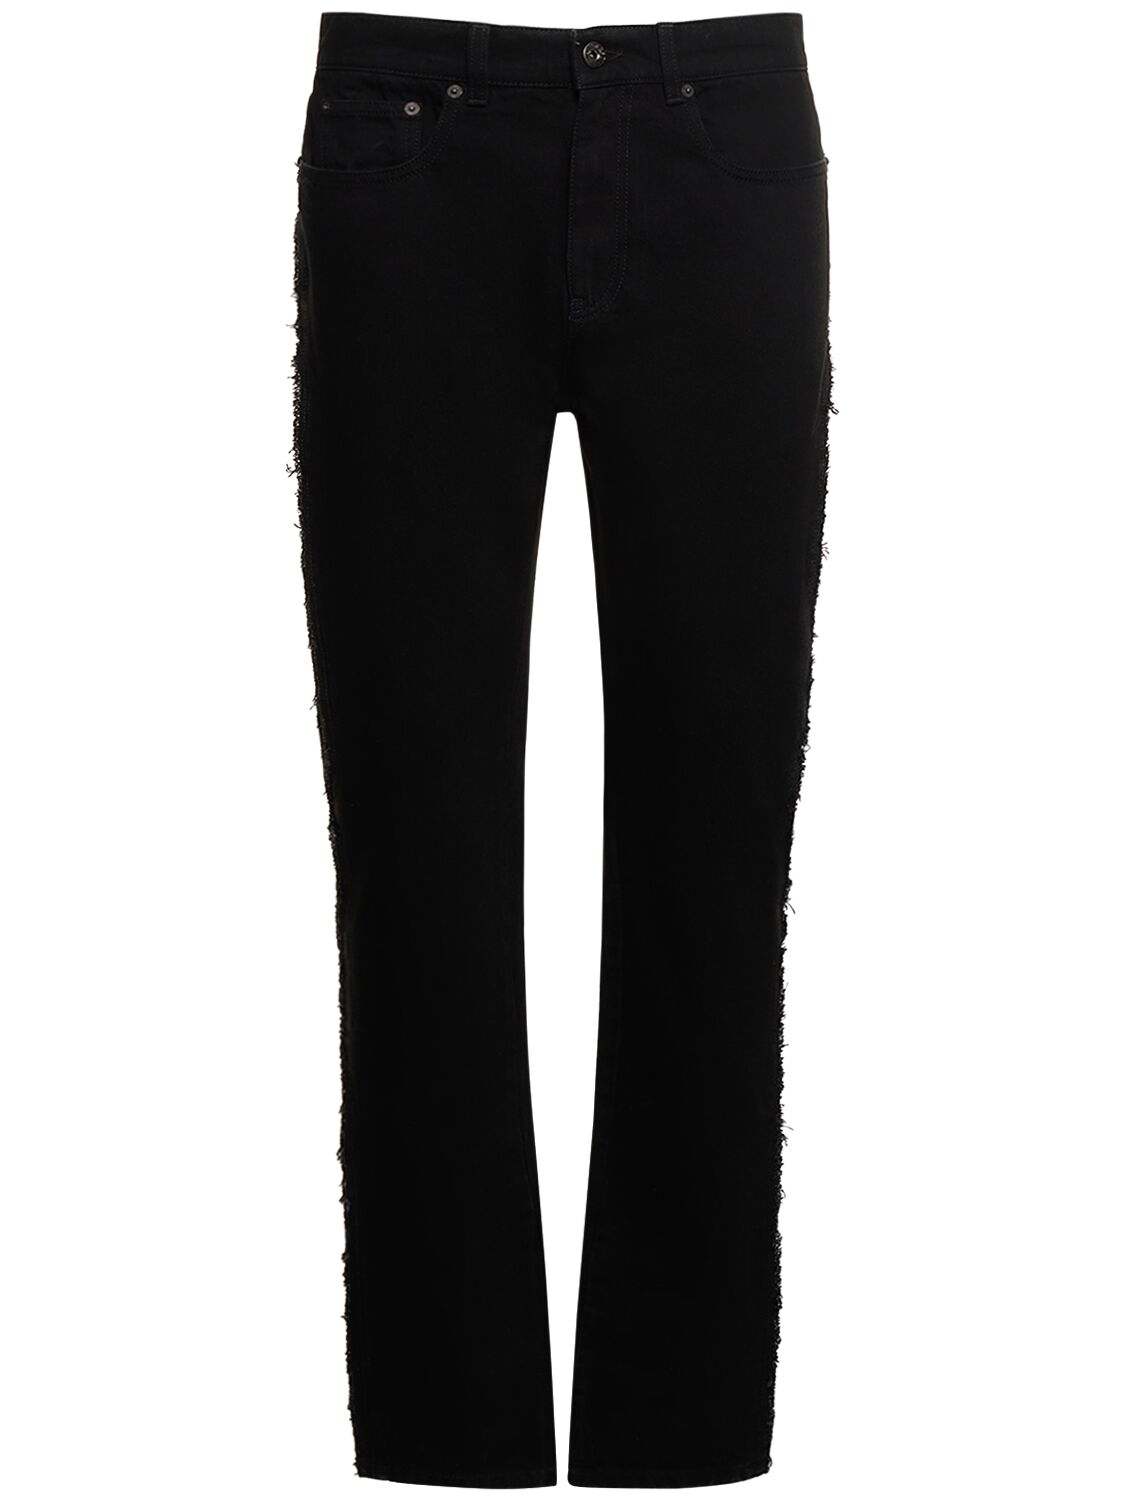 Image of Twisted Slim Fit Cotton Denim Jeans